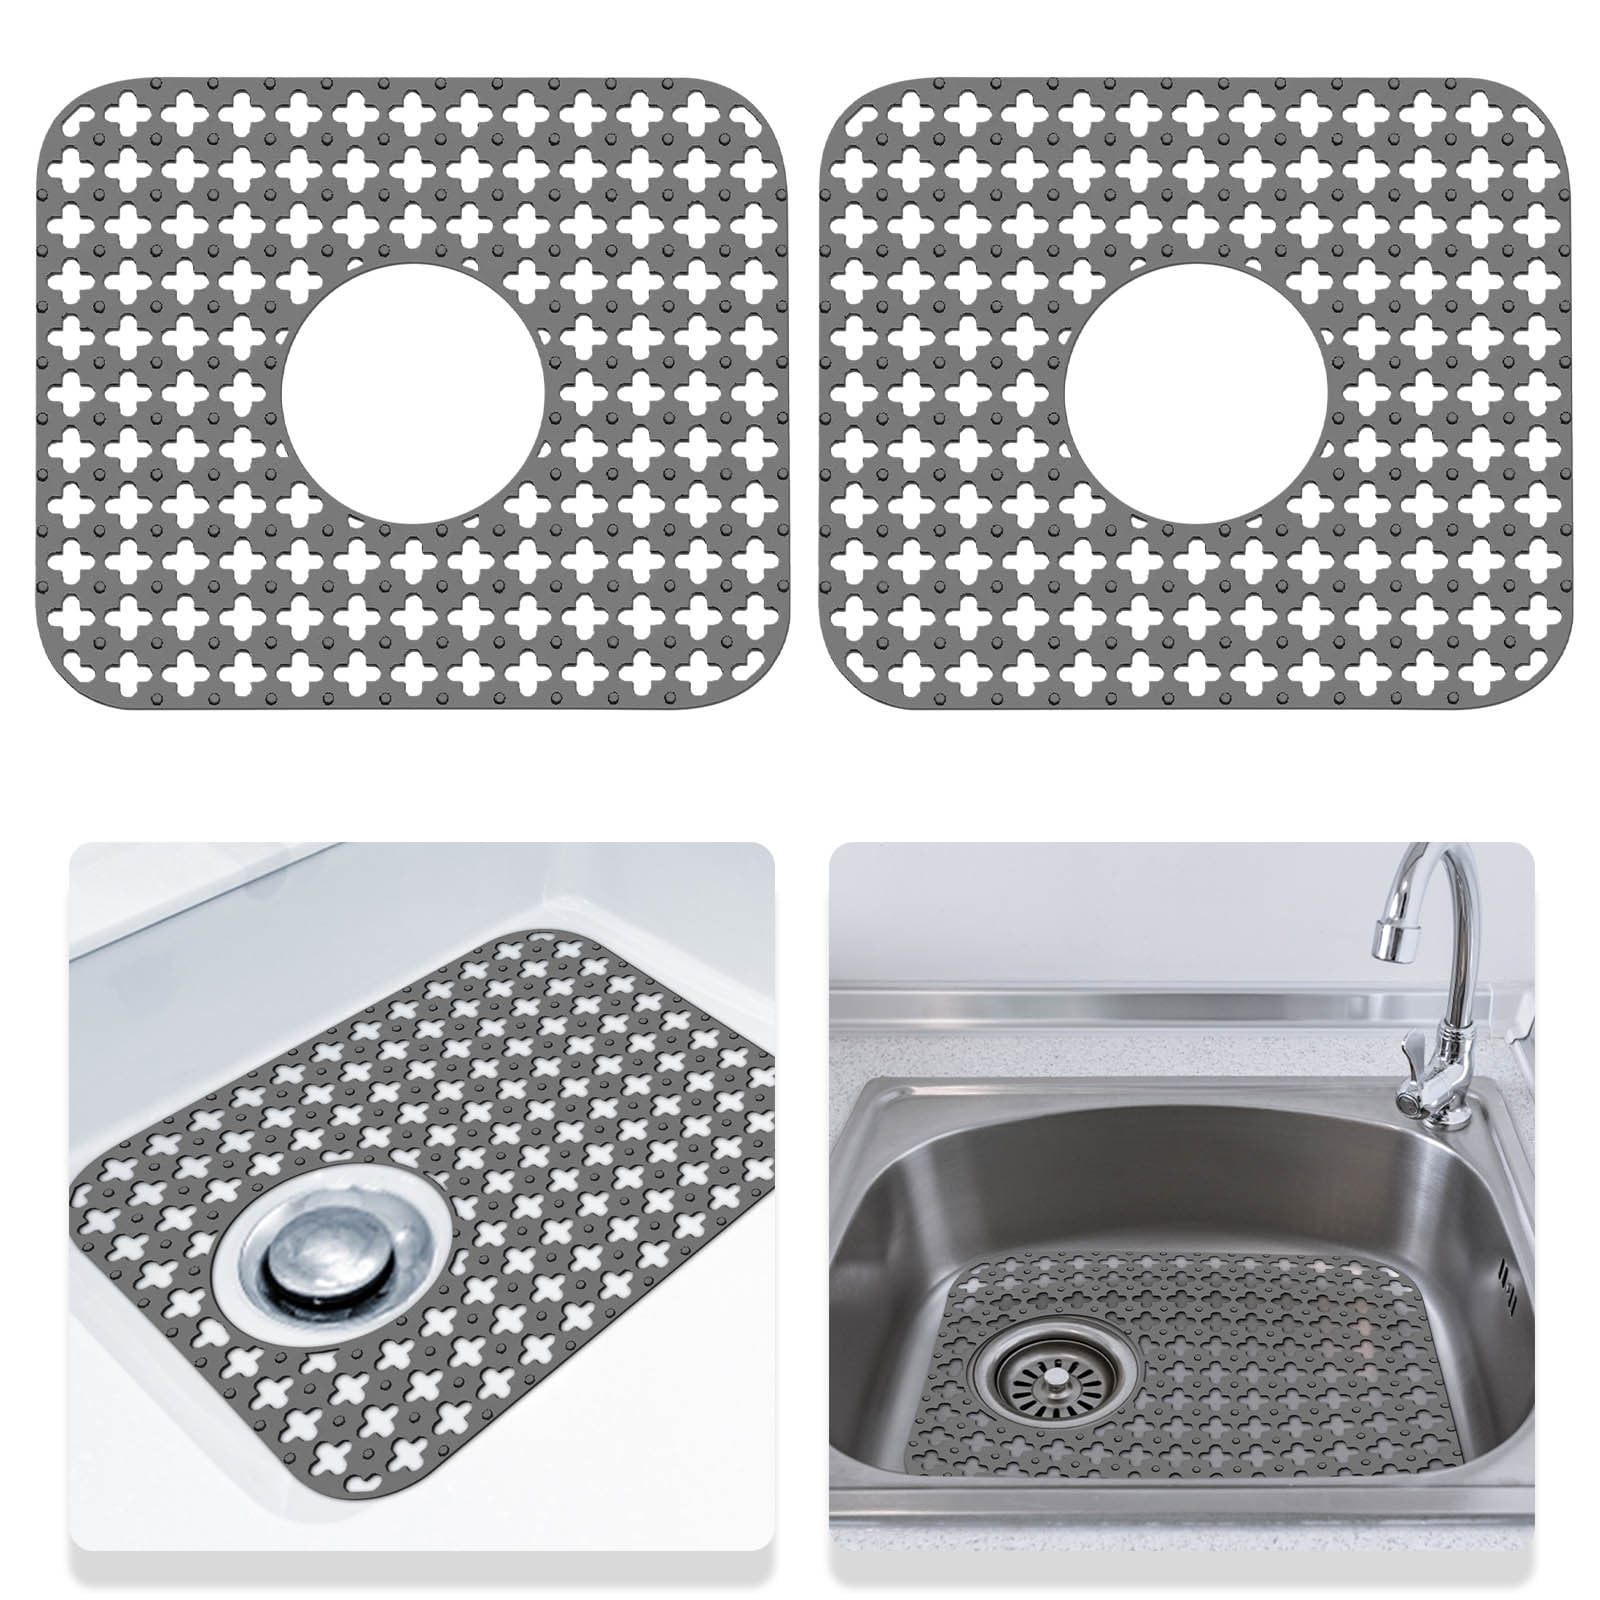 Jikolililili Clearance Silicone Sink Mat Rear Kitchen Sink Protector Accessory Folding Non-Slip Sink Mats for Bottom of Stainless Steel Porcelain Sink